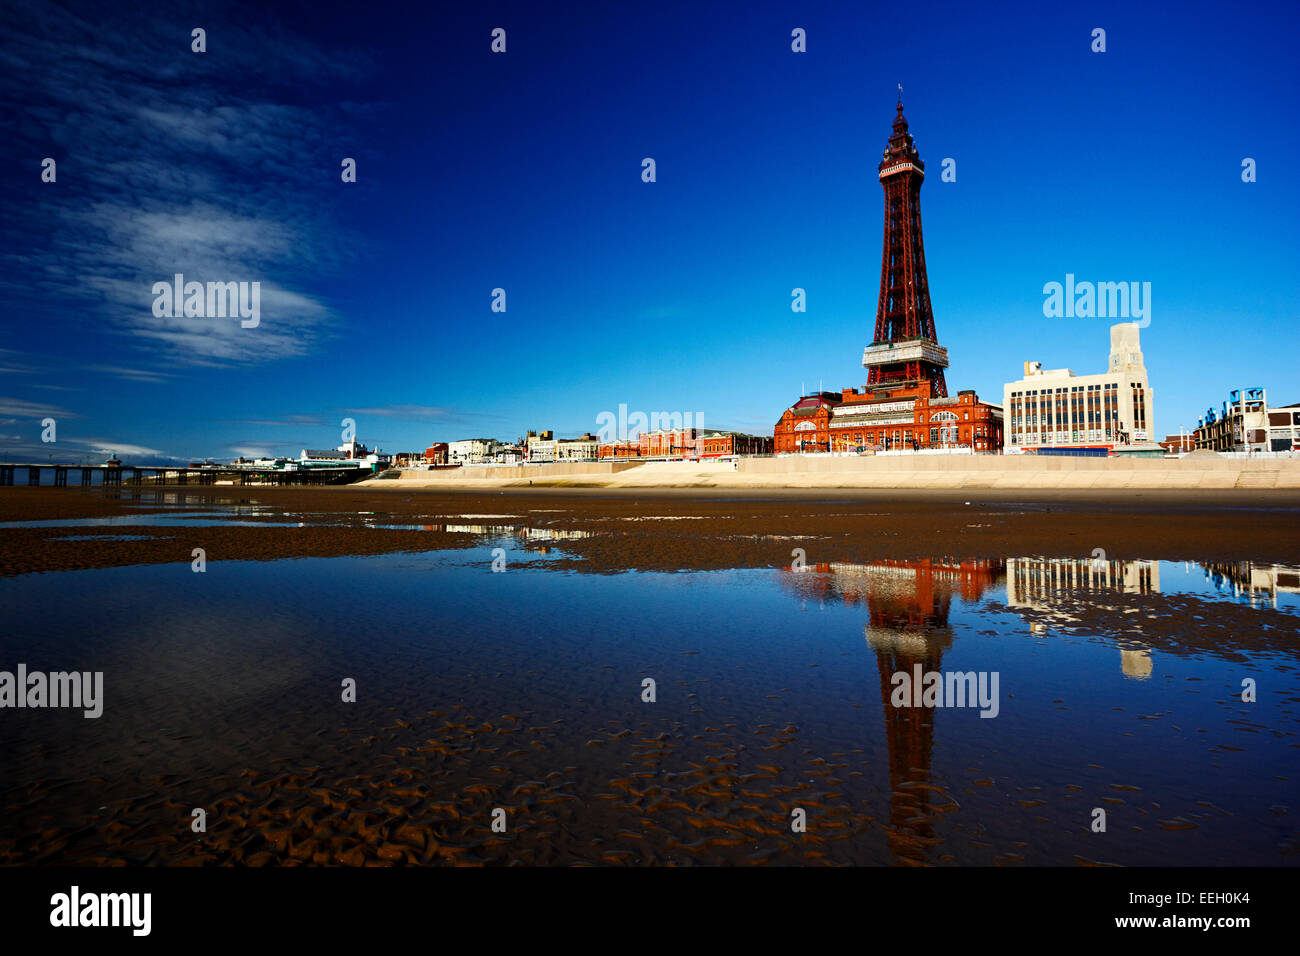 reflection of Blackpool tower and seafront promenade in pool on the beach lancashire england uk Stock Photo